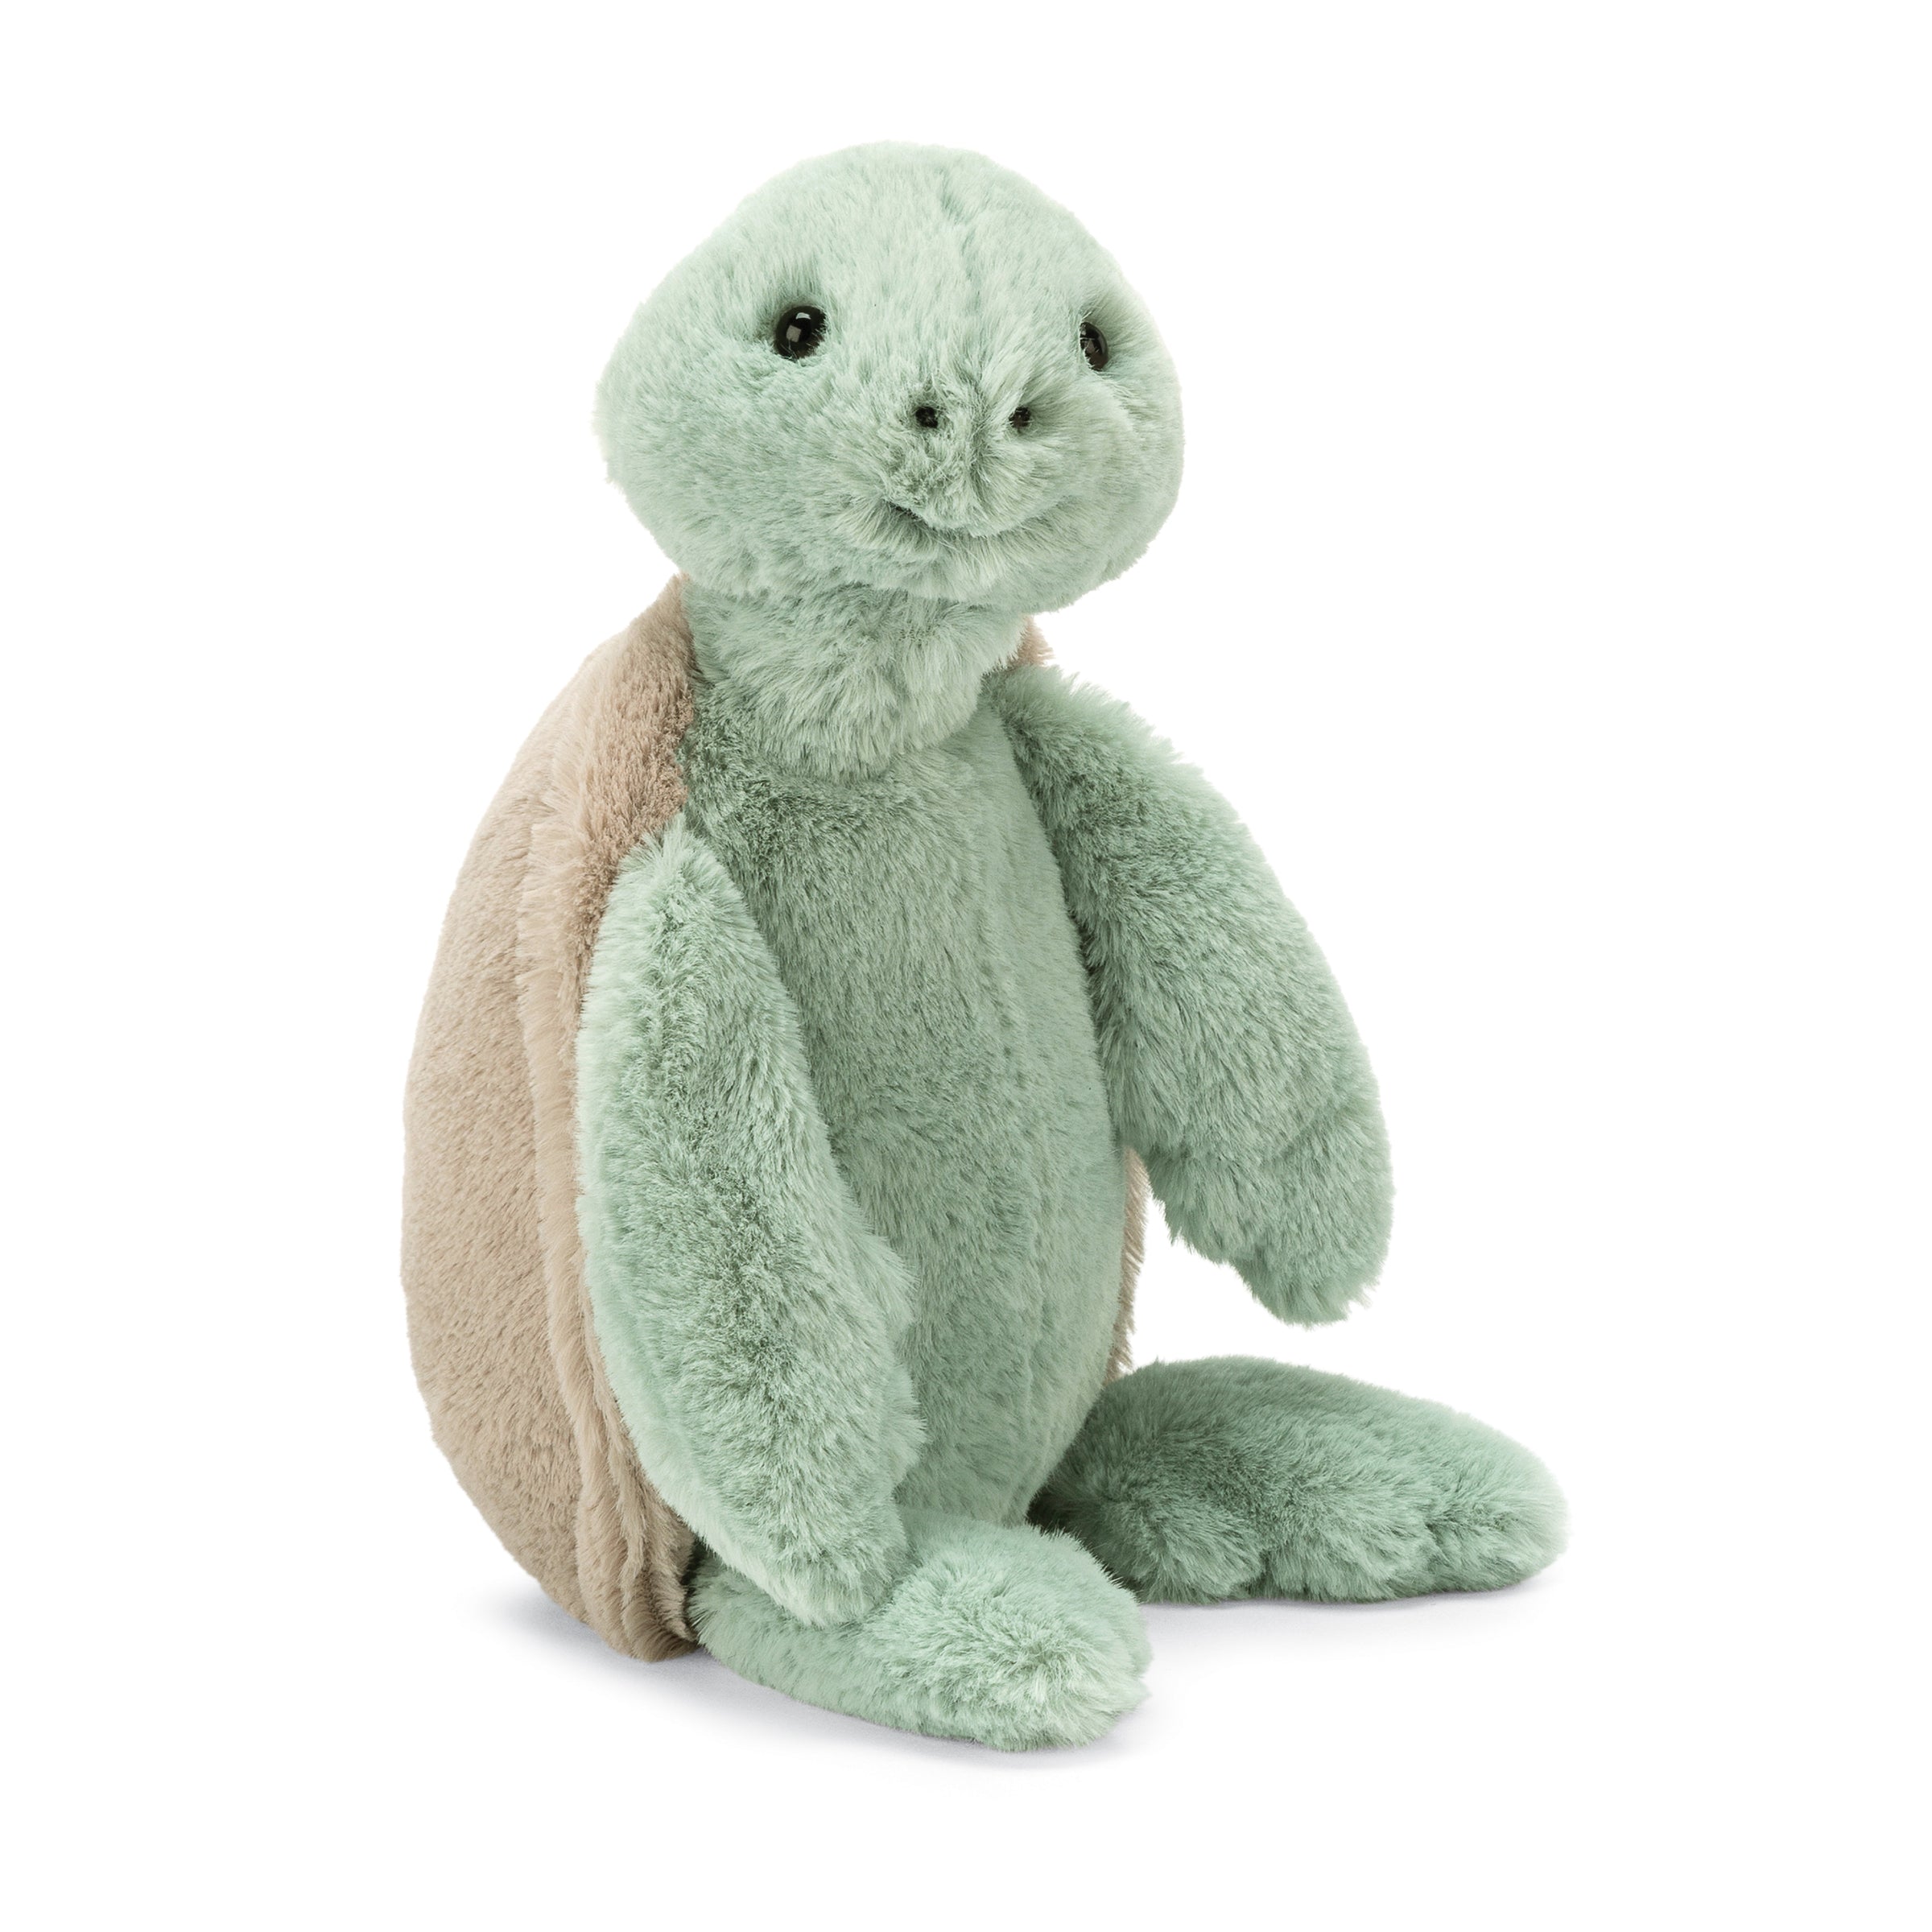 stuffed plush toy of a light teal and brown soft small turtle made by jellycat